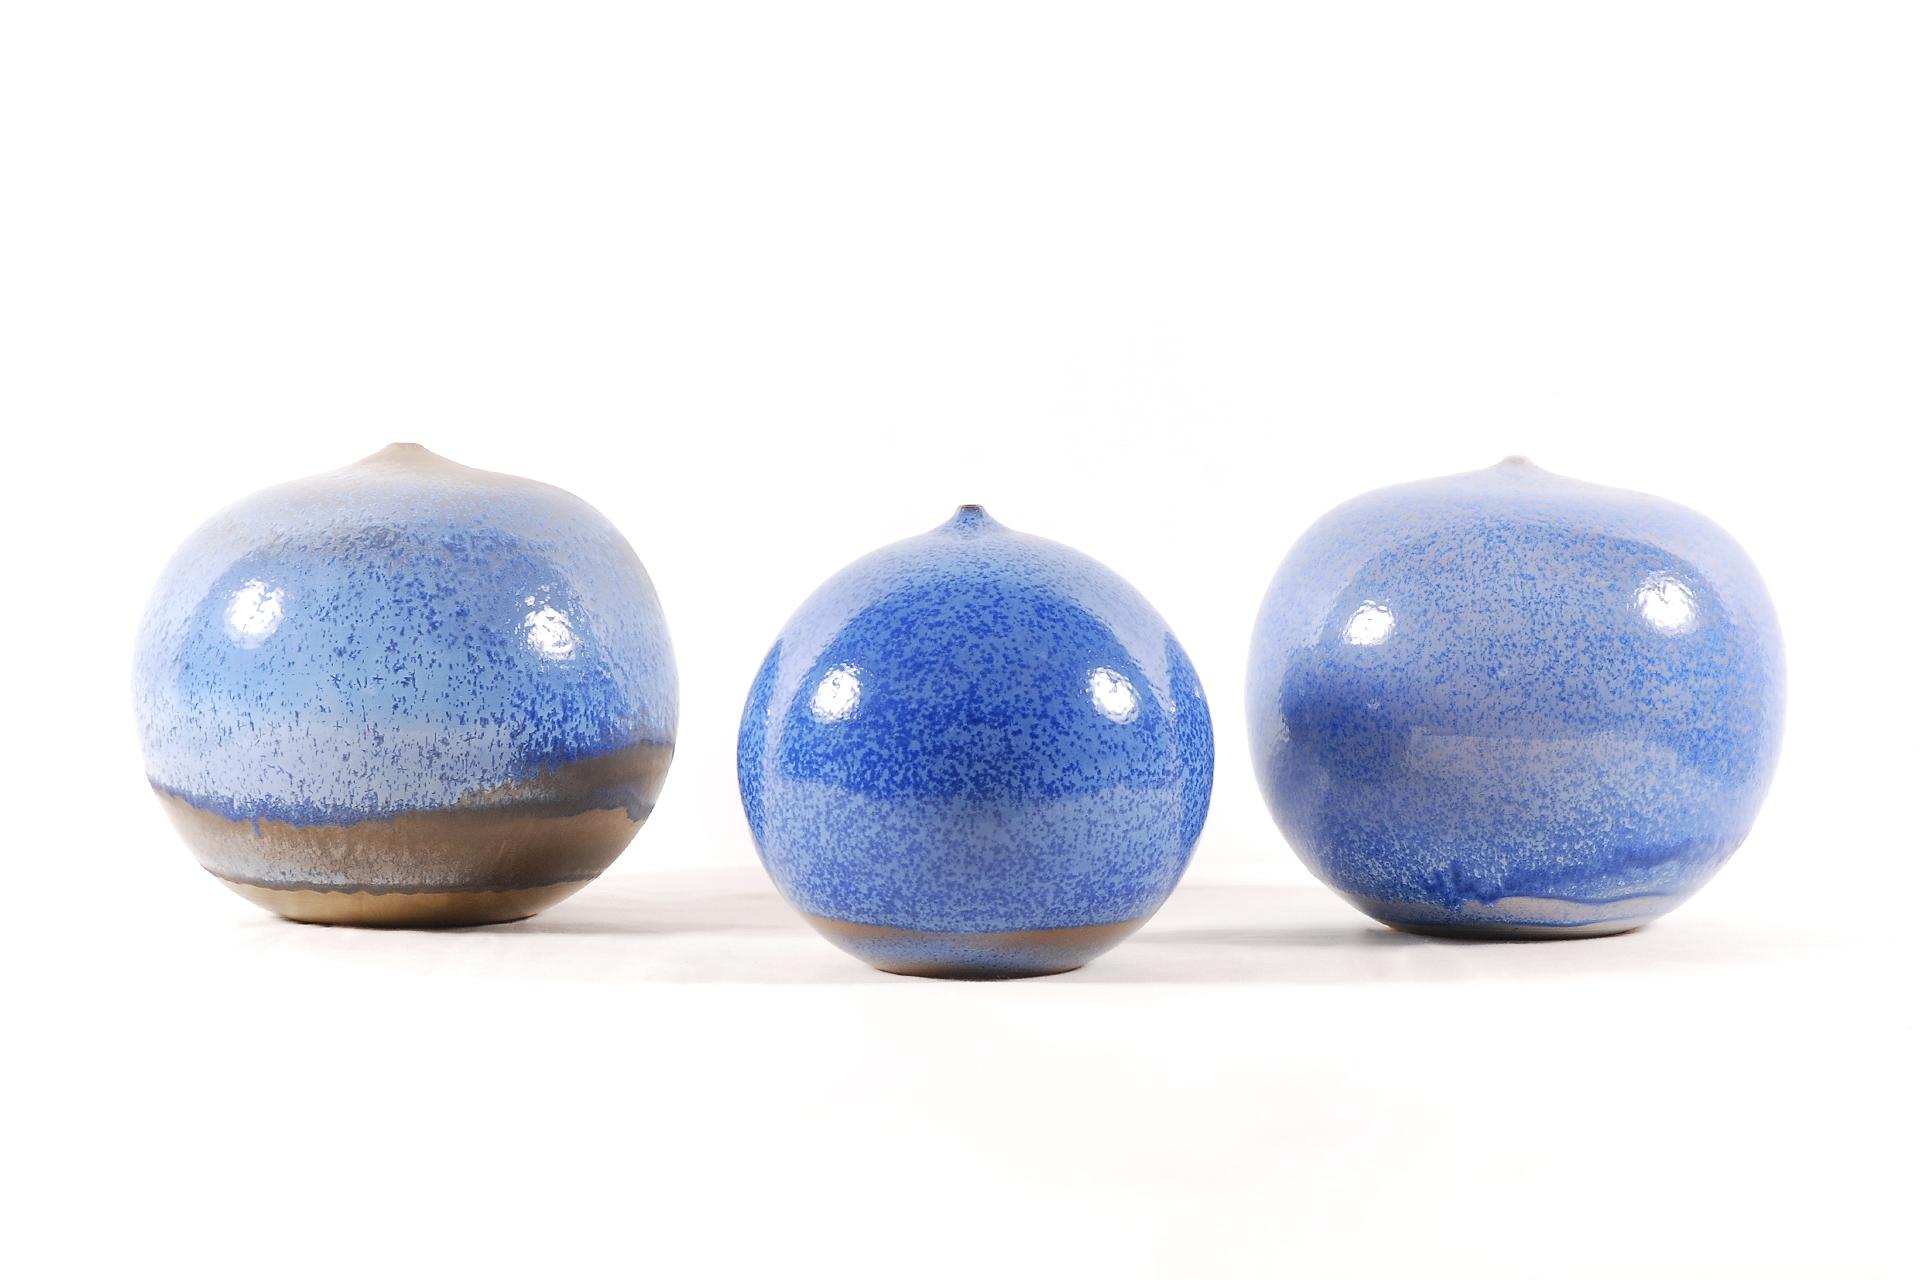 Spherical sculptures by the Belgian ceramist Antonio Lampecco.
Round Ceramic with crystallized enamel and a tiny aperture removing any function to the object.
Humble, Lampecco didn't consider himself as an artist, but obviously he was one of them